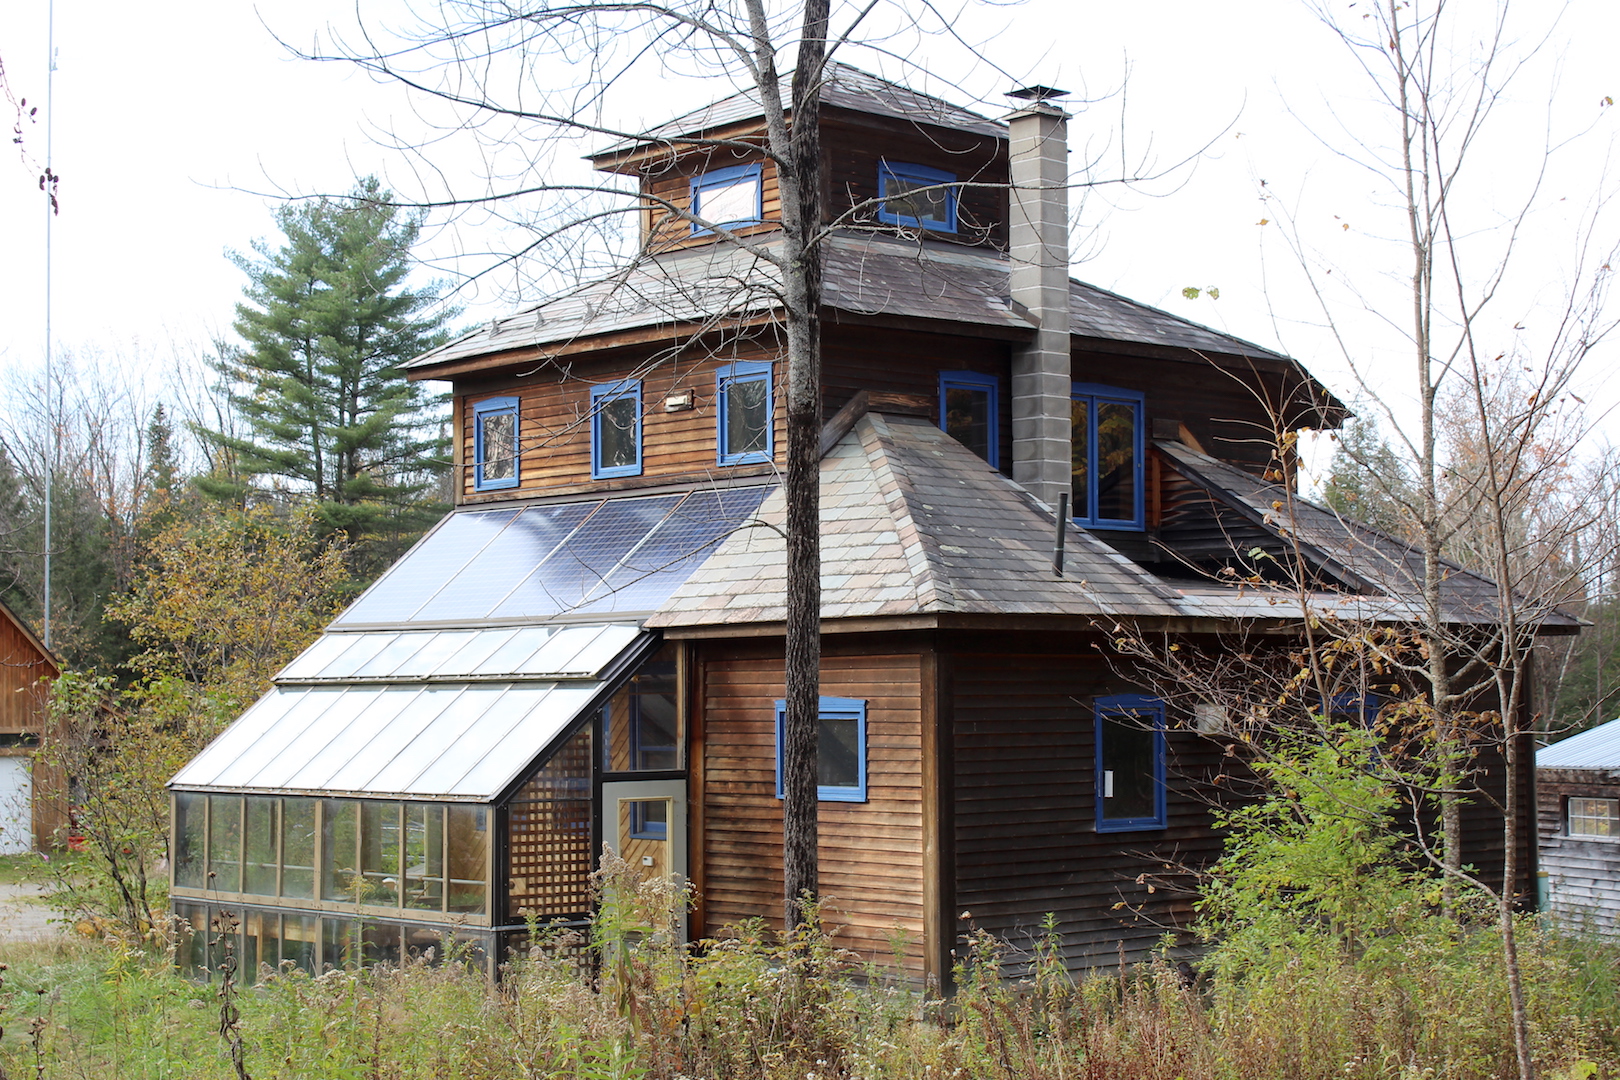 7 Tips for a More Dependable Off Grid System